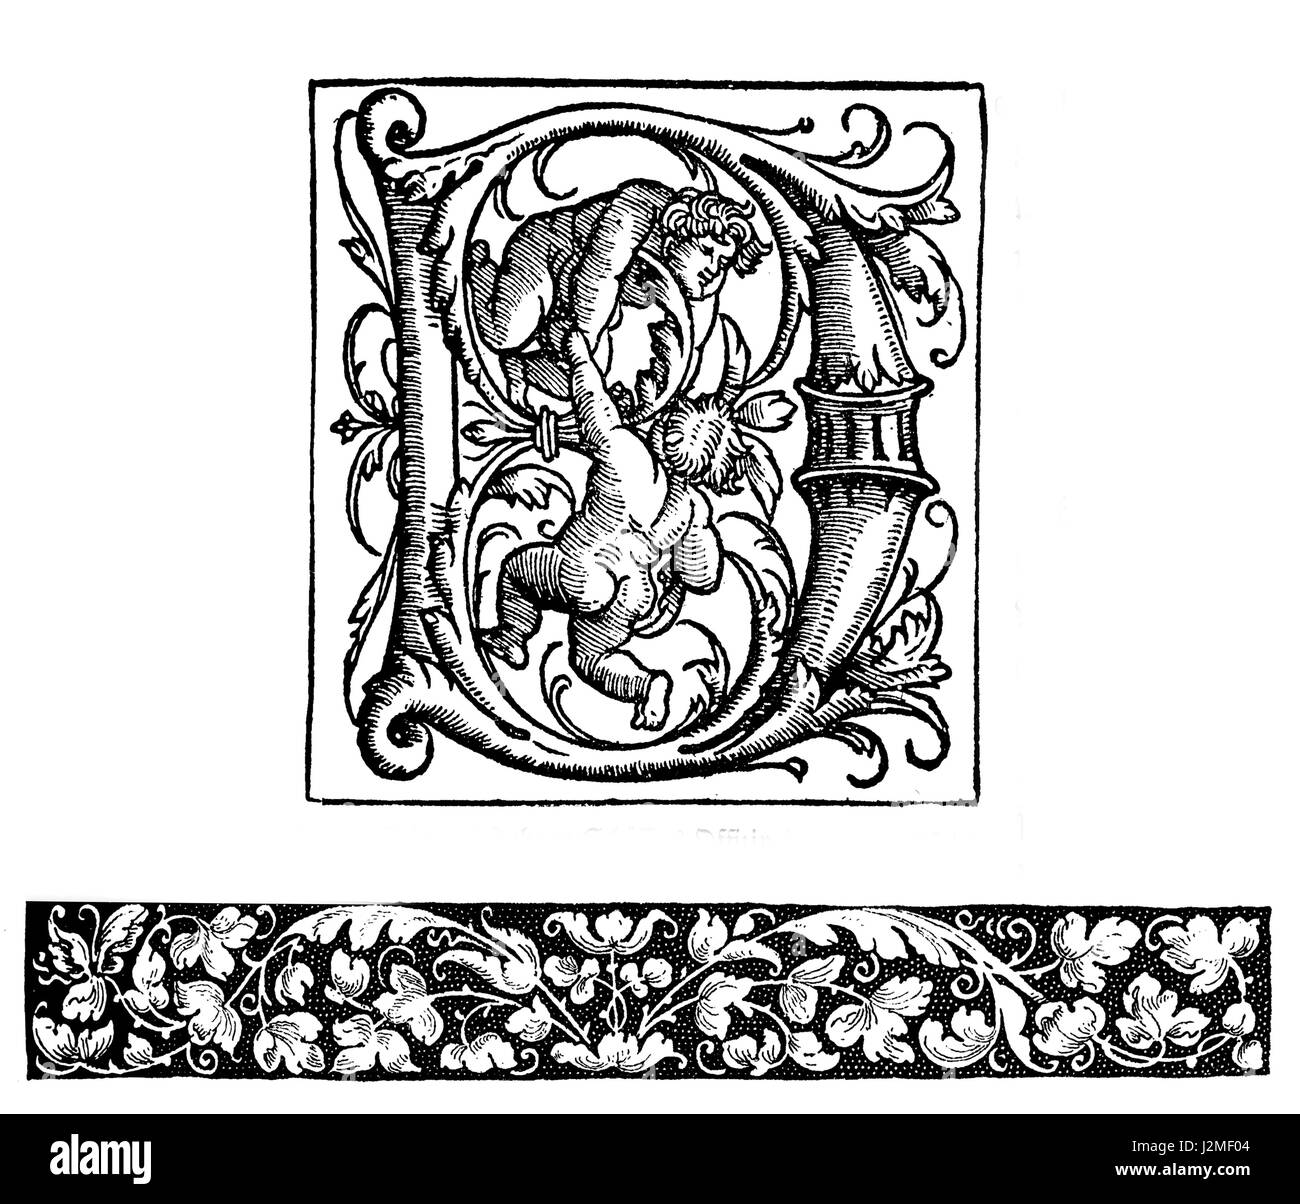 XVI century artworks, decorated capital letter D and typographic floral border Stock Photo